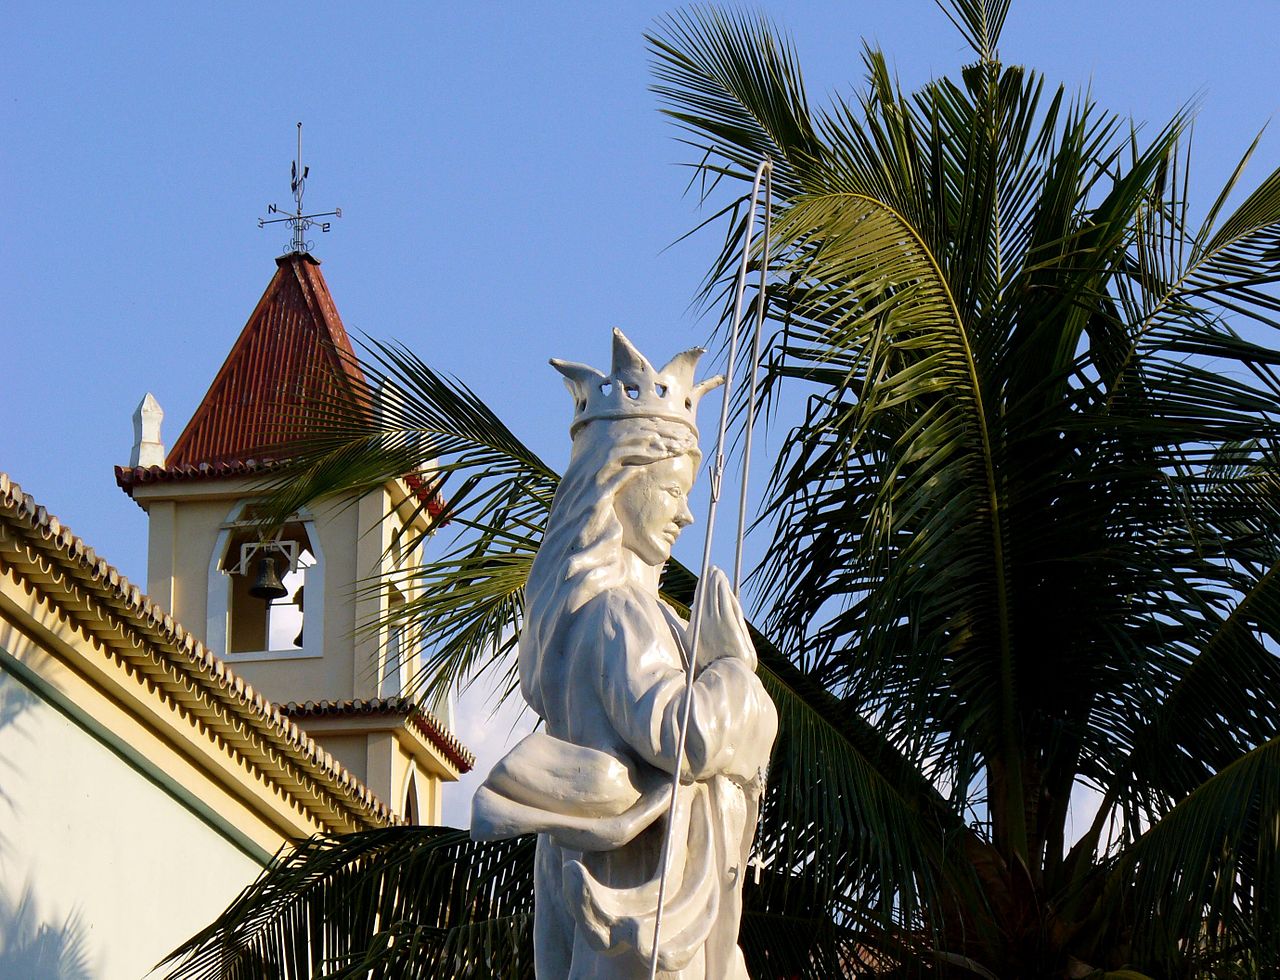 Statue of Our Lady in Balide